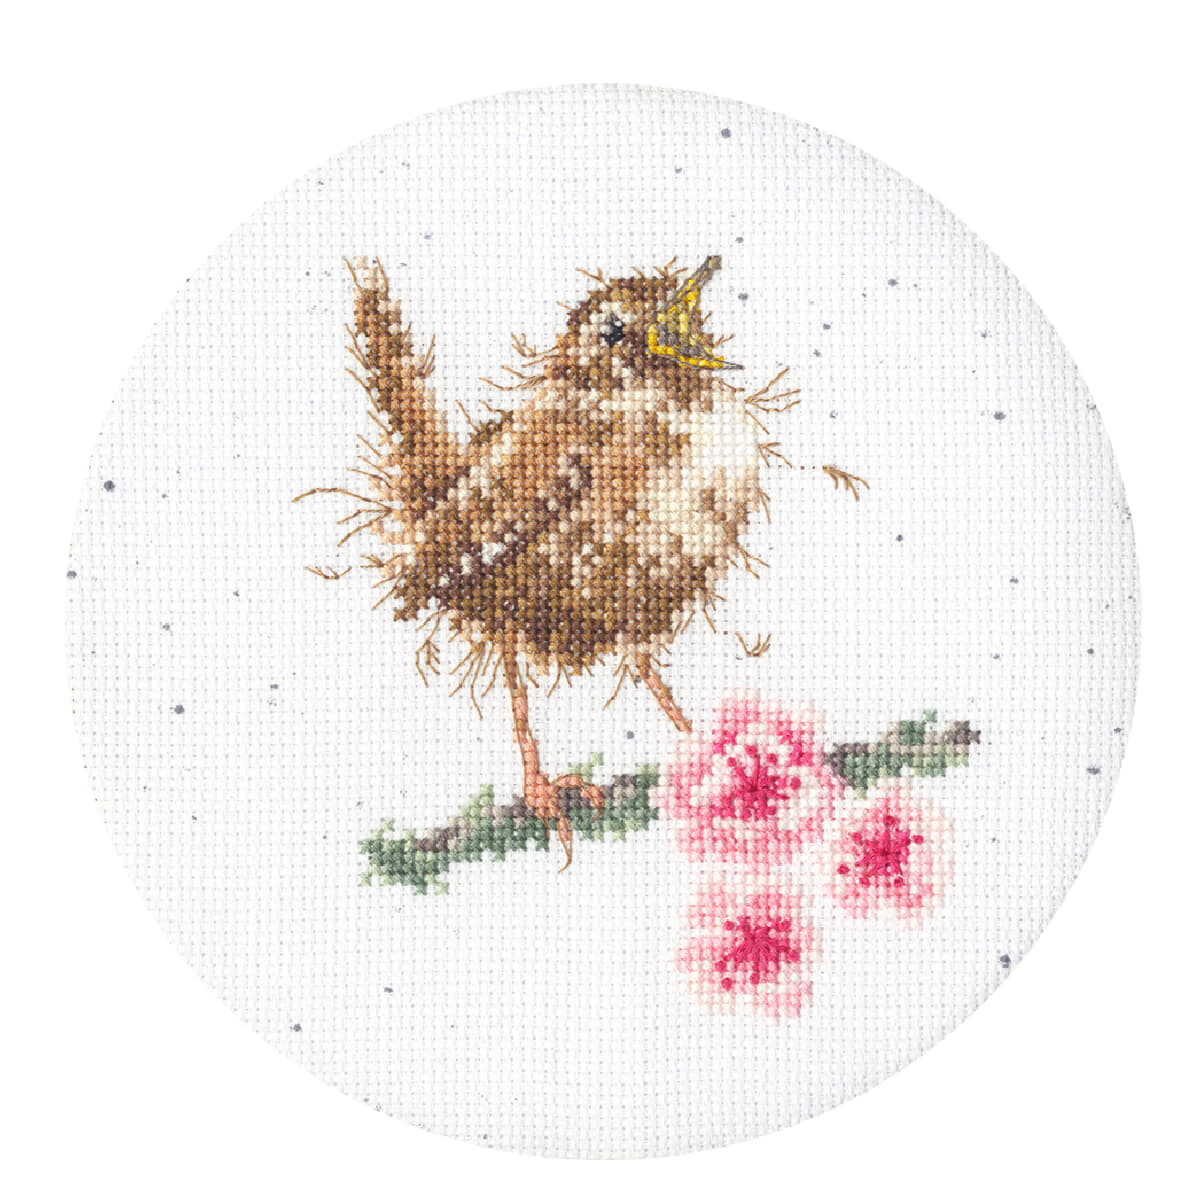 Cross-stitch illustration of a small bird standing on a...